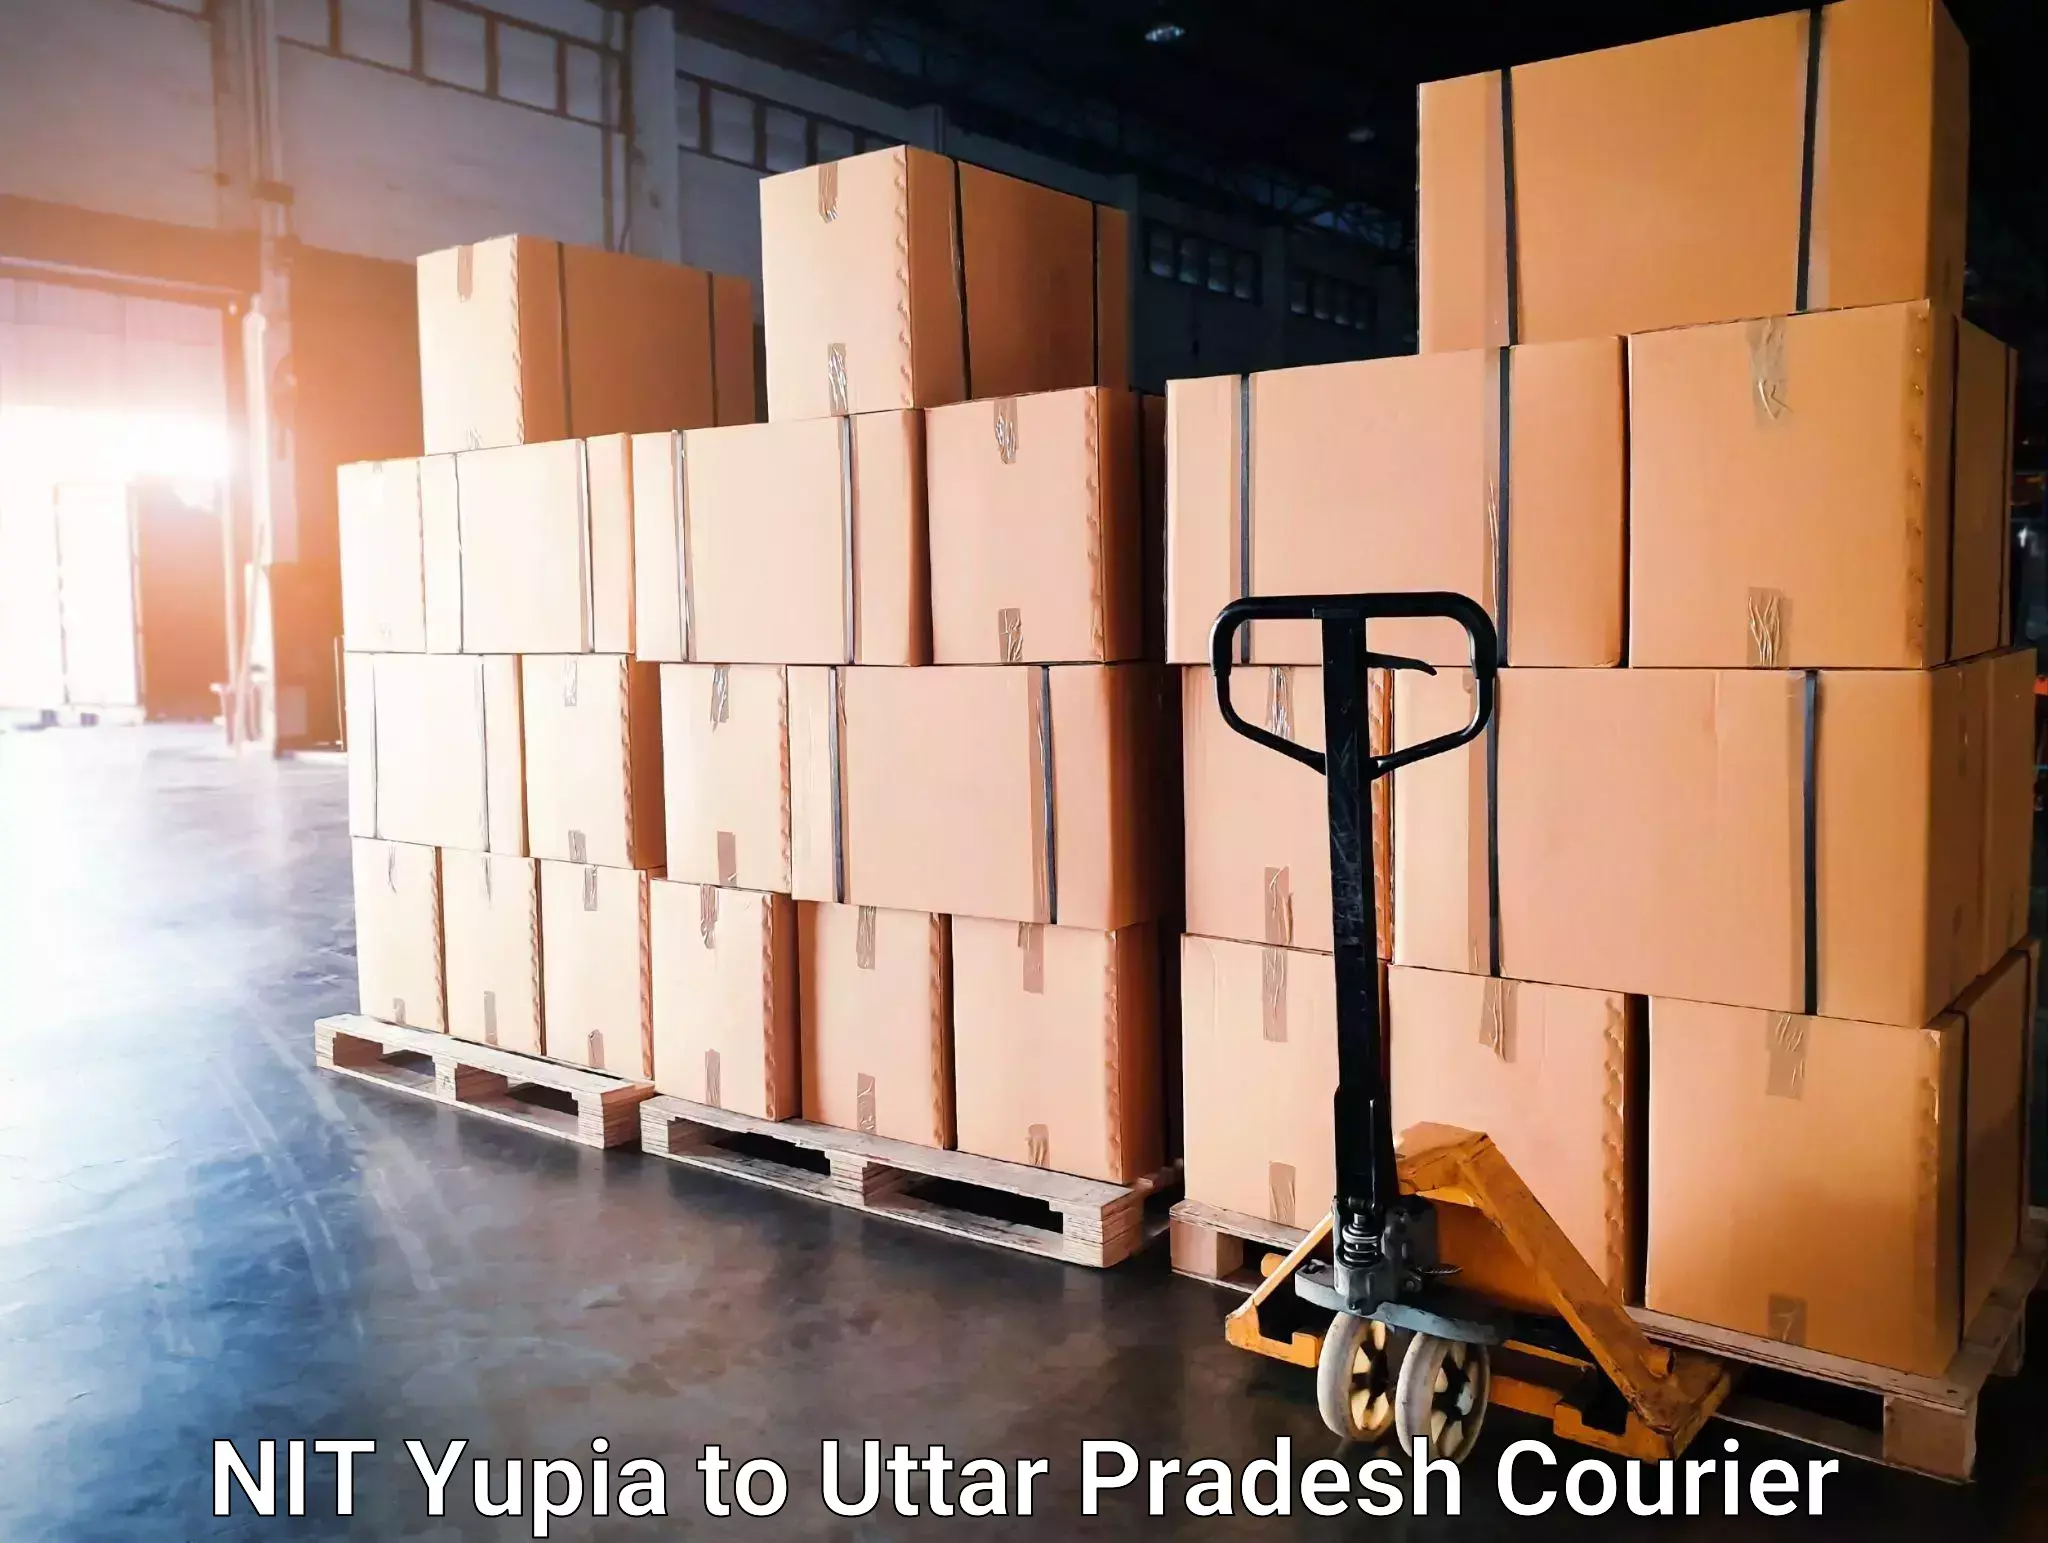 Doorstep delivery service NIT Yupia to Agra